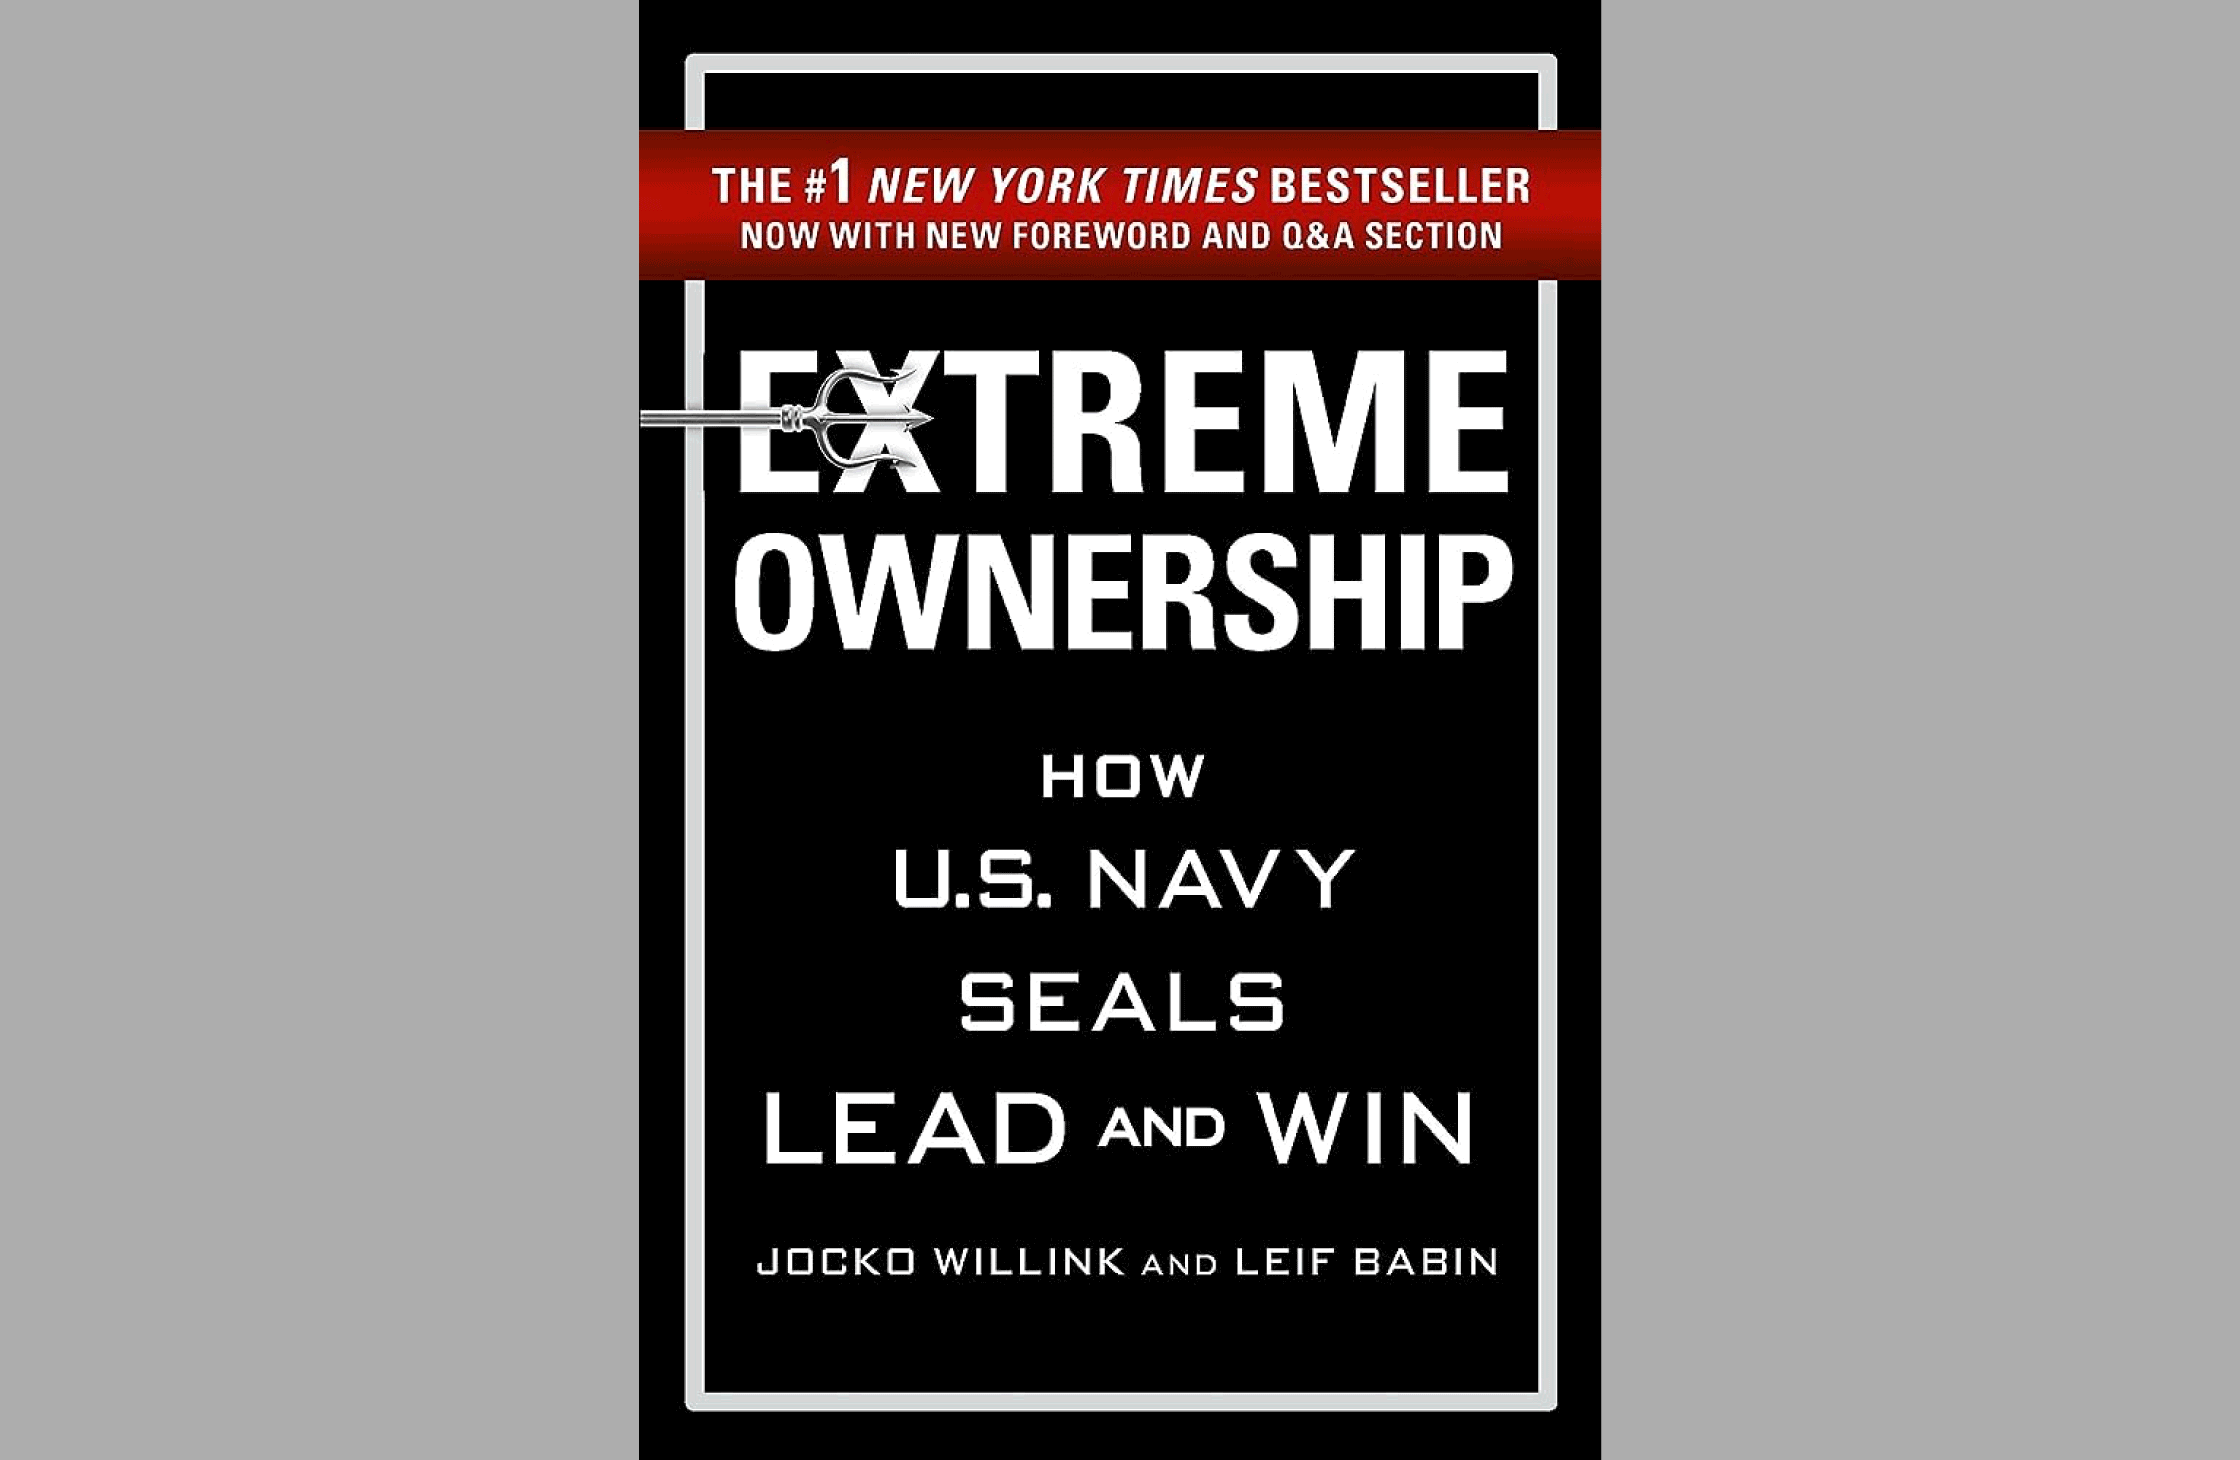 Summary: Extreme Ownership: How U.S. Navy SEALs Lead and Win: Jocko Willink | Leif Babin